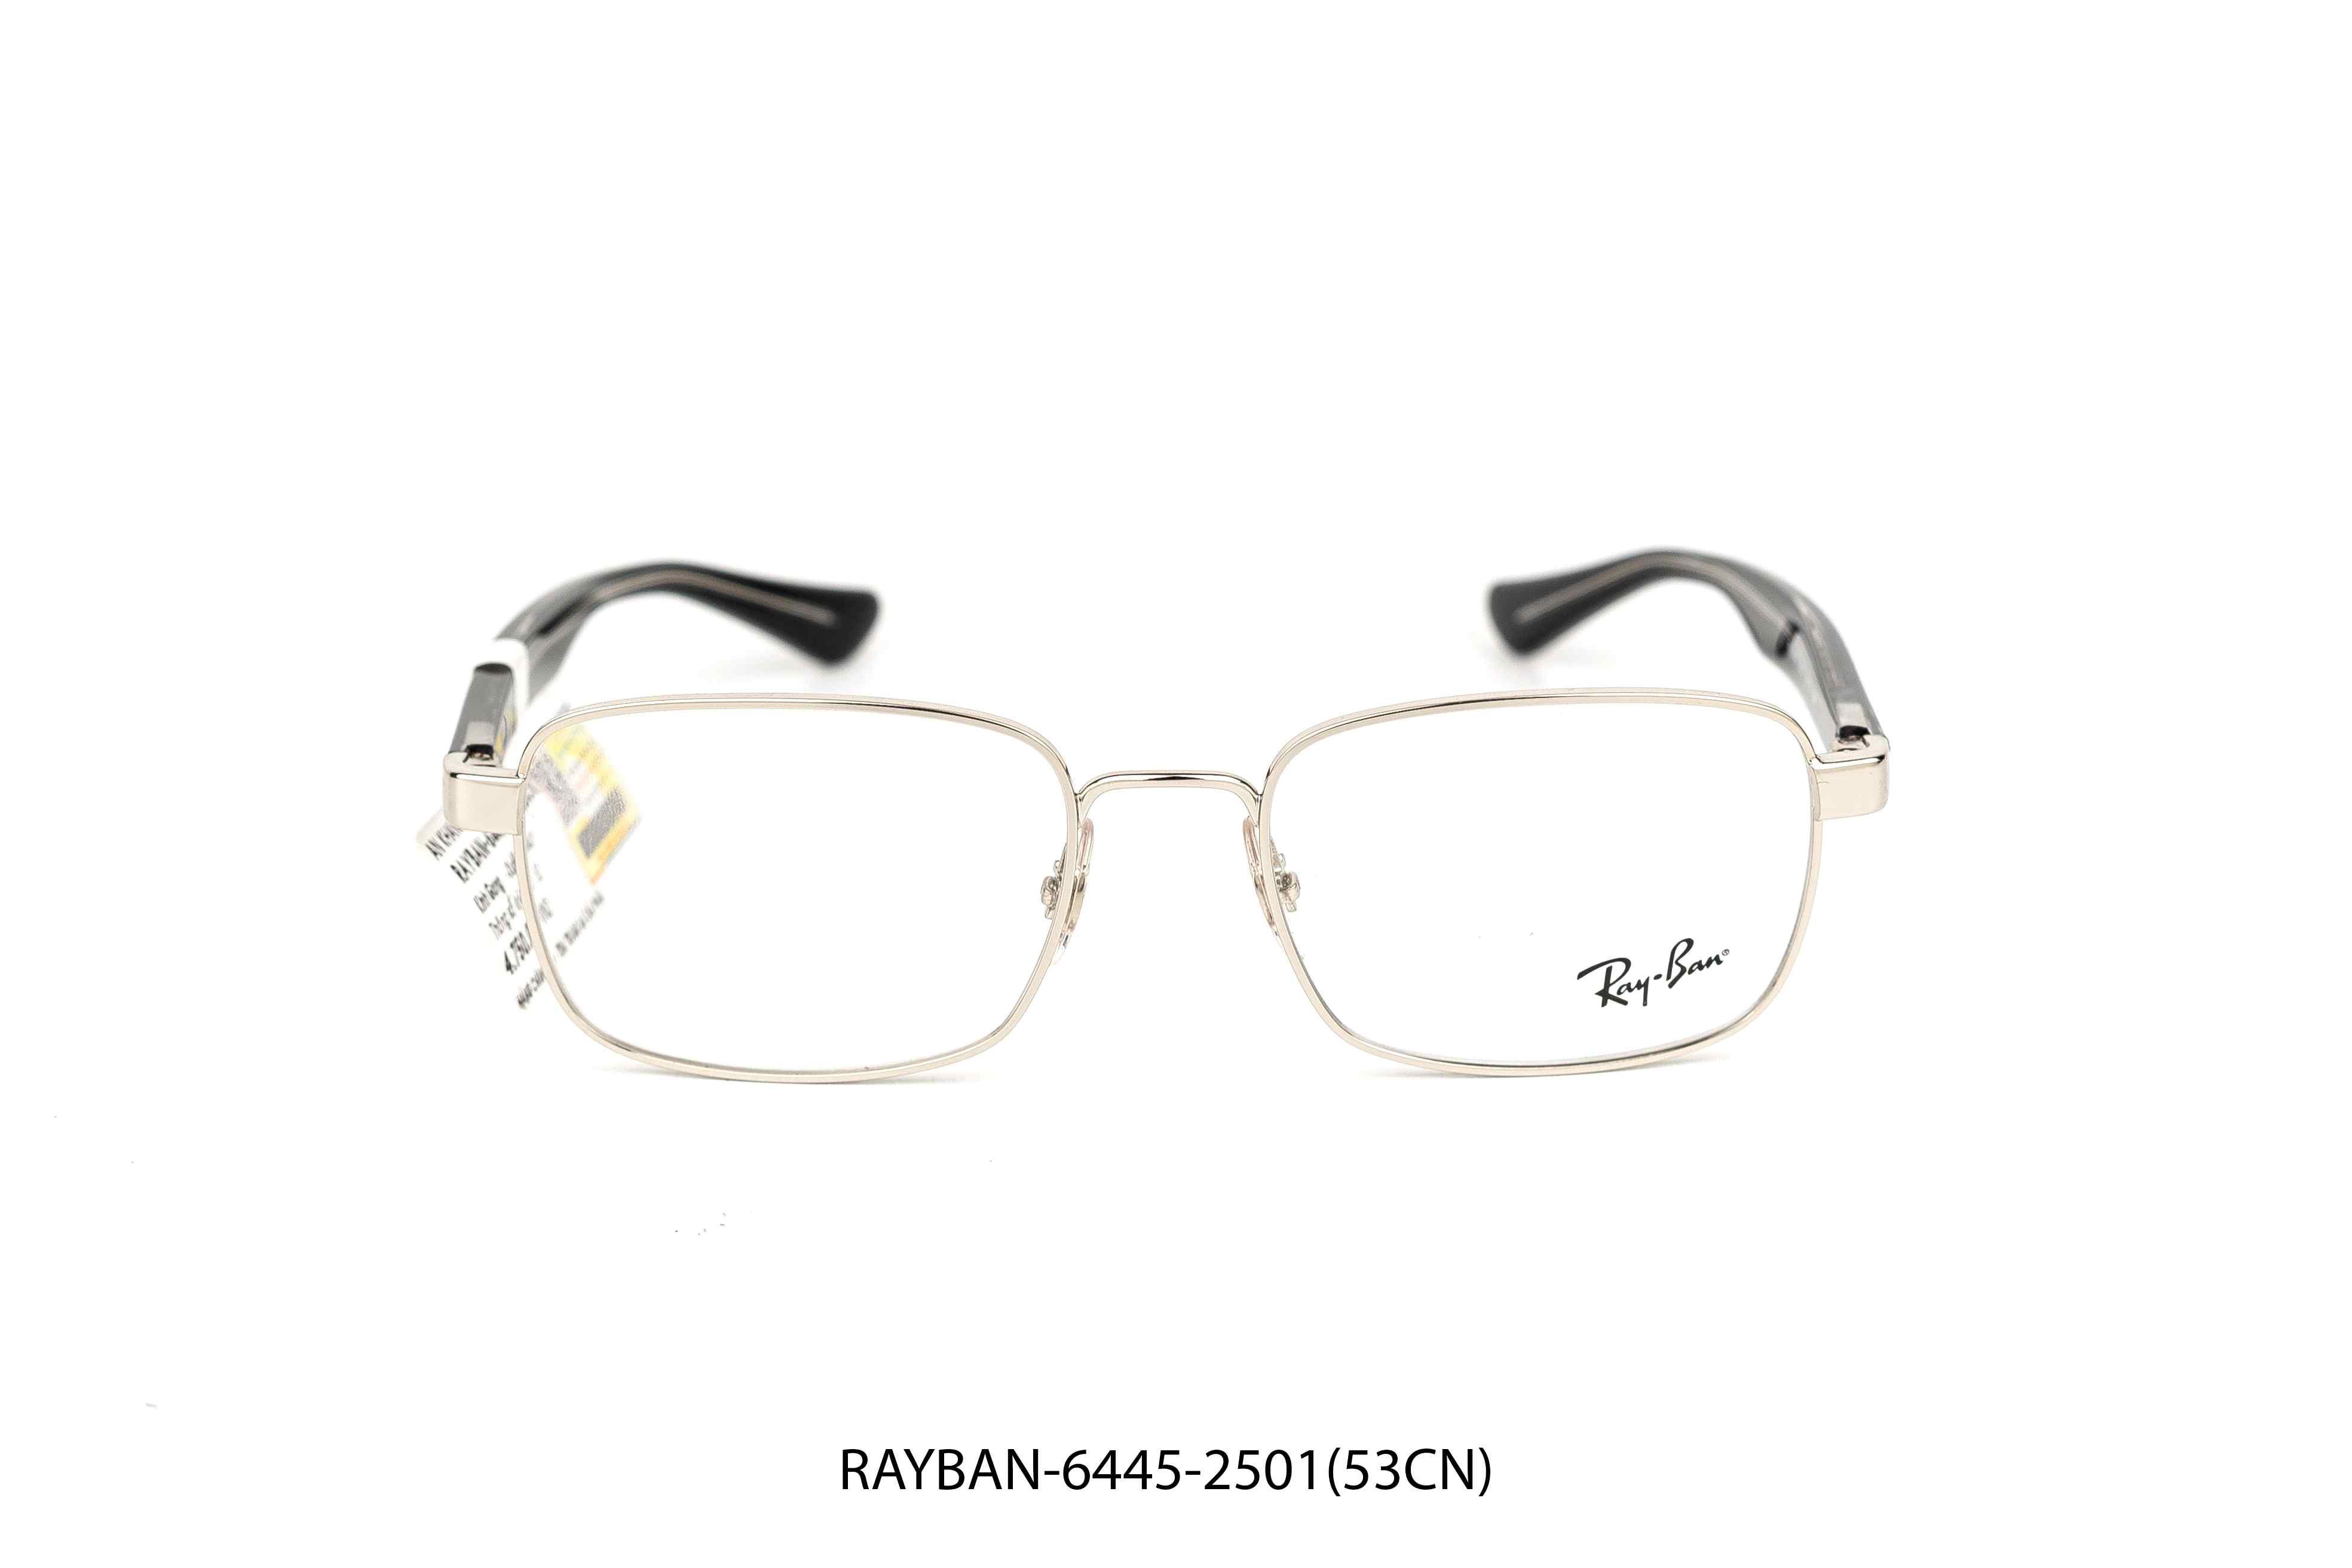 RAY-BAN-6445-2501(53CN) - OURESS